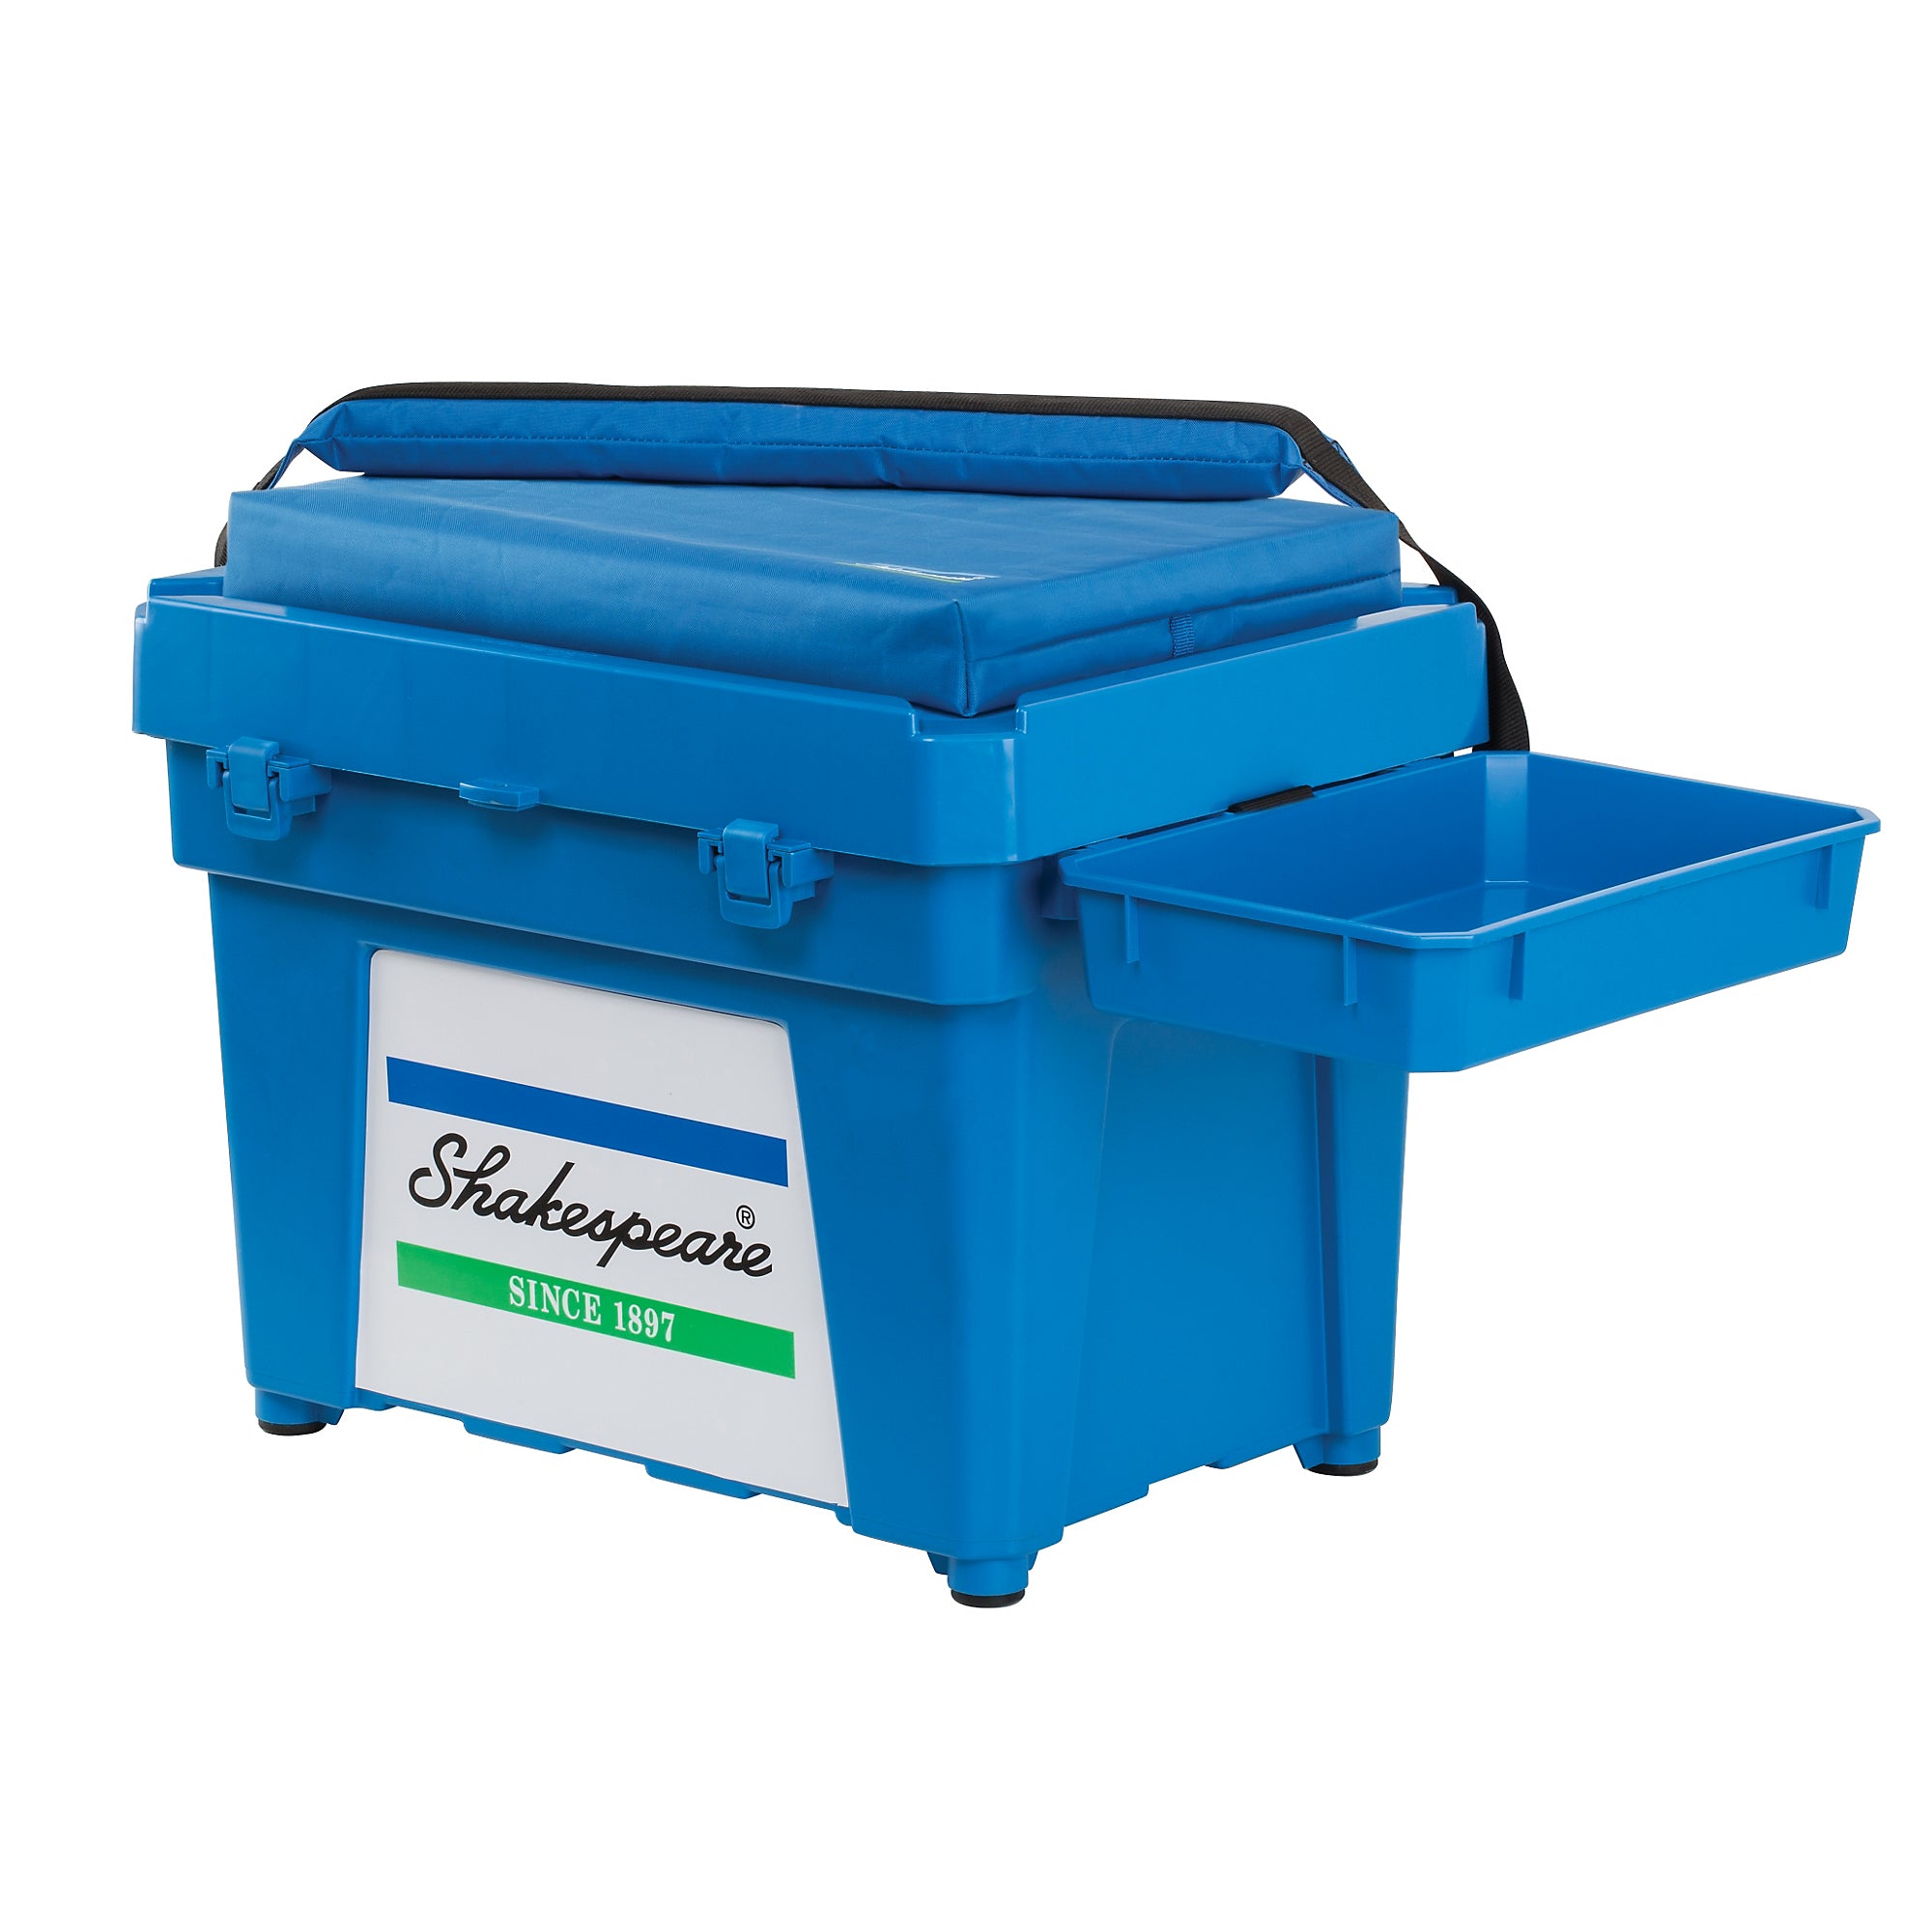 Shakespeare Seatbox Blue - Package